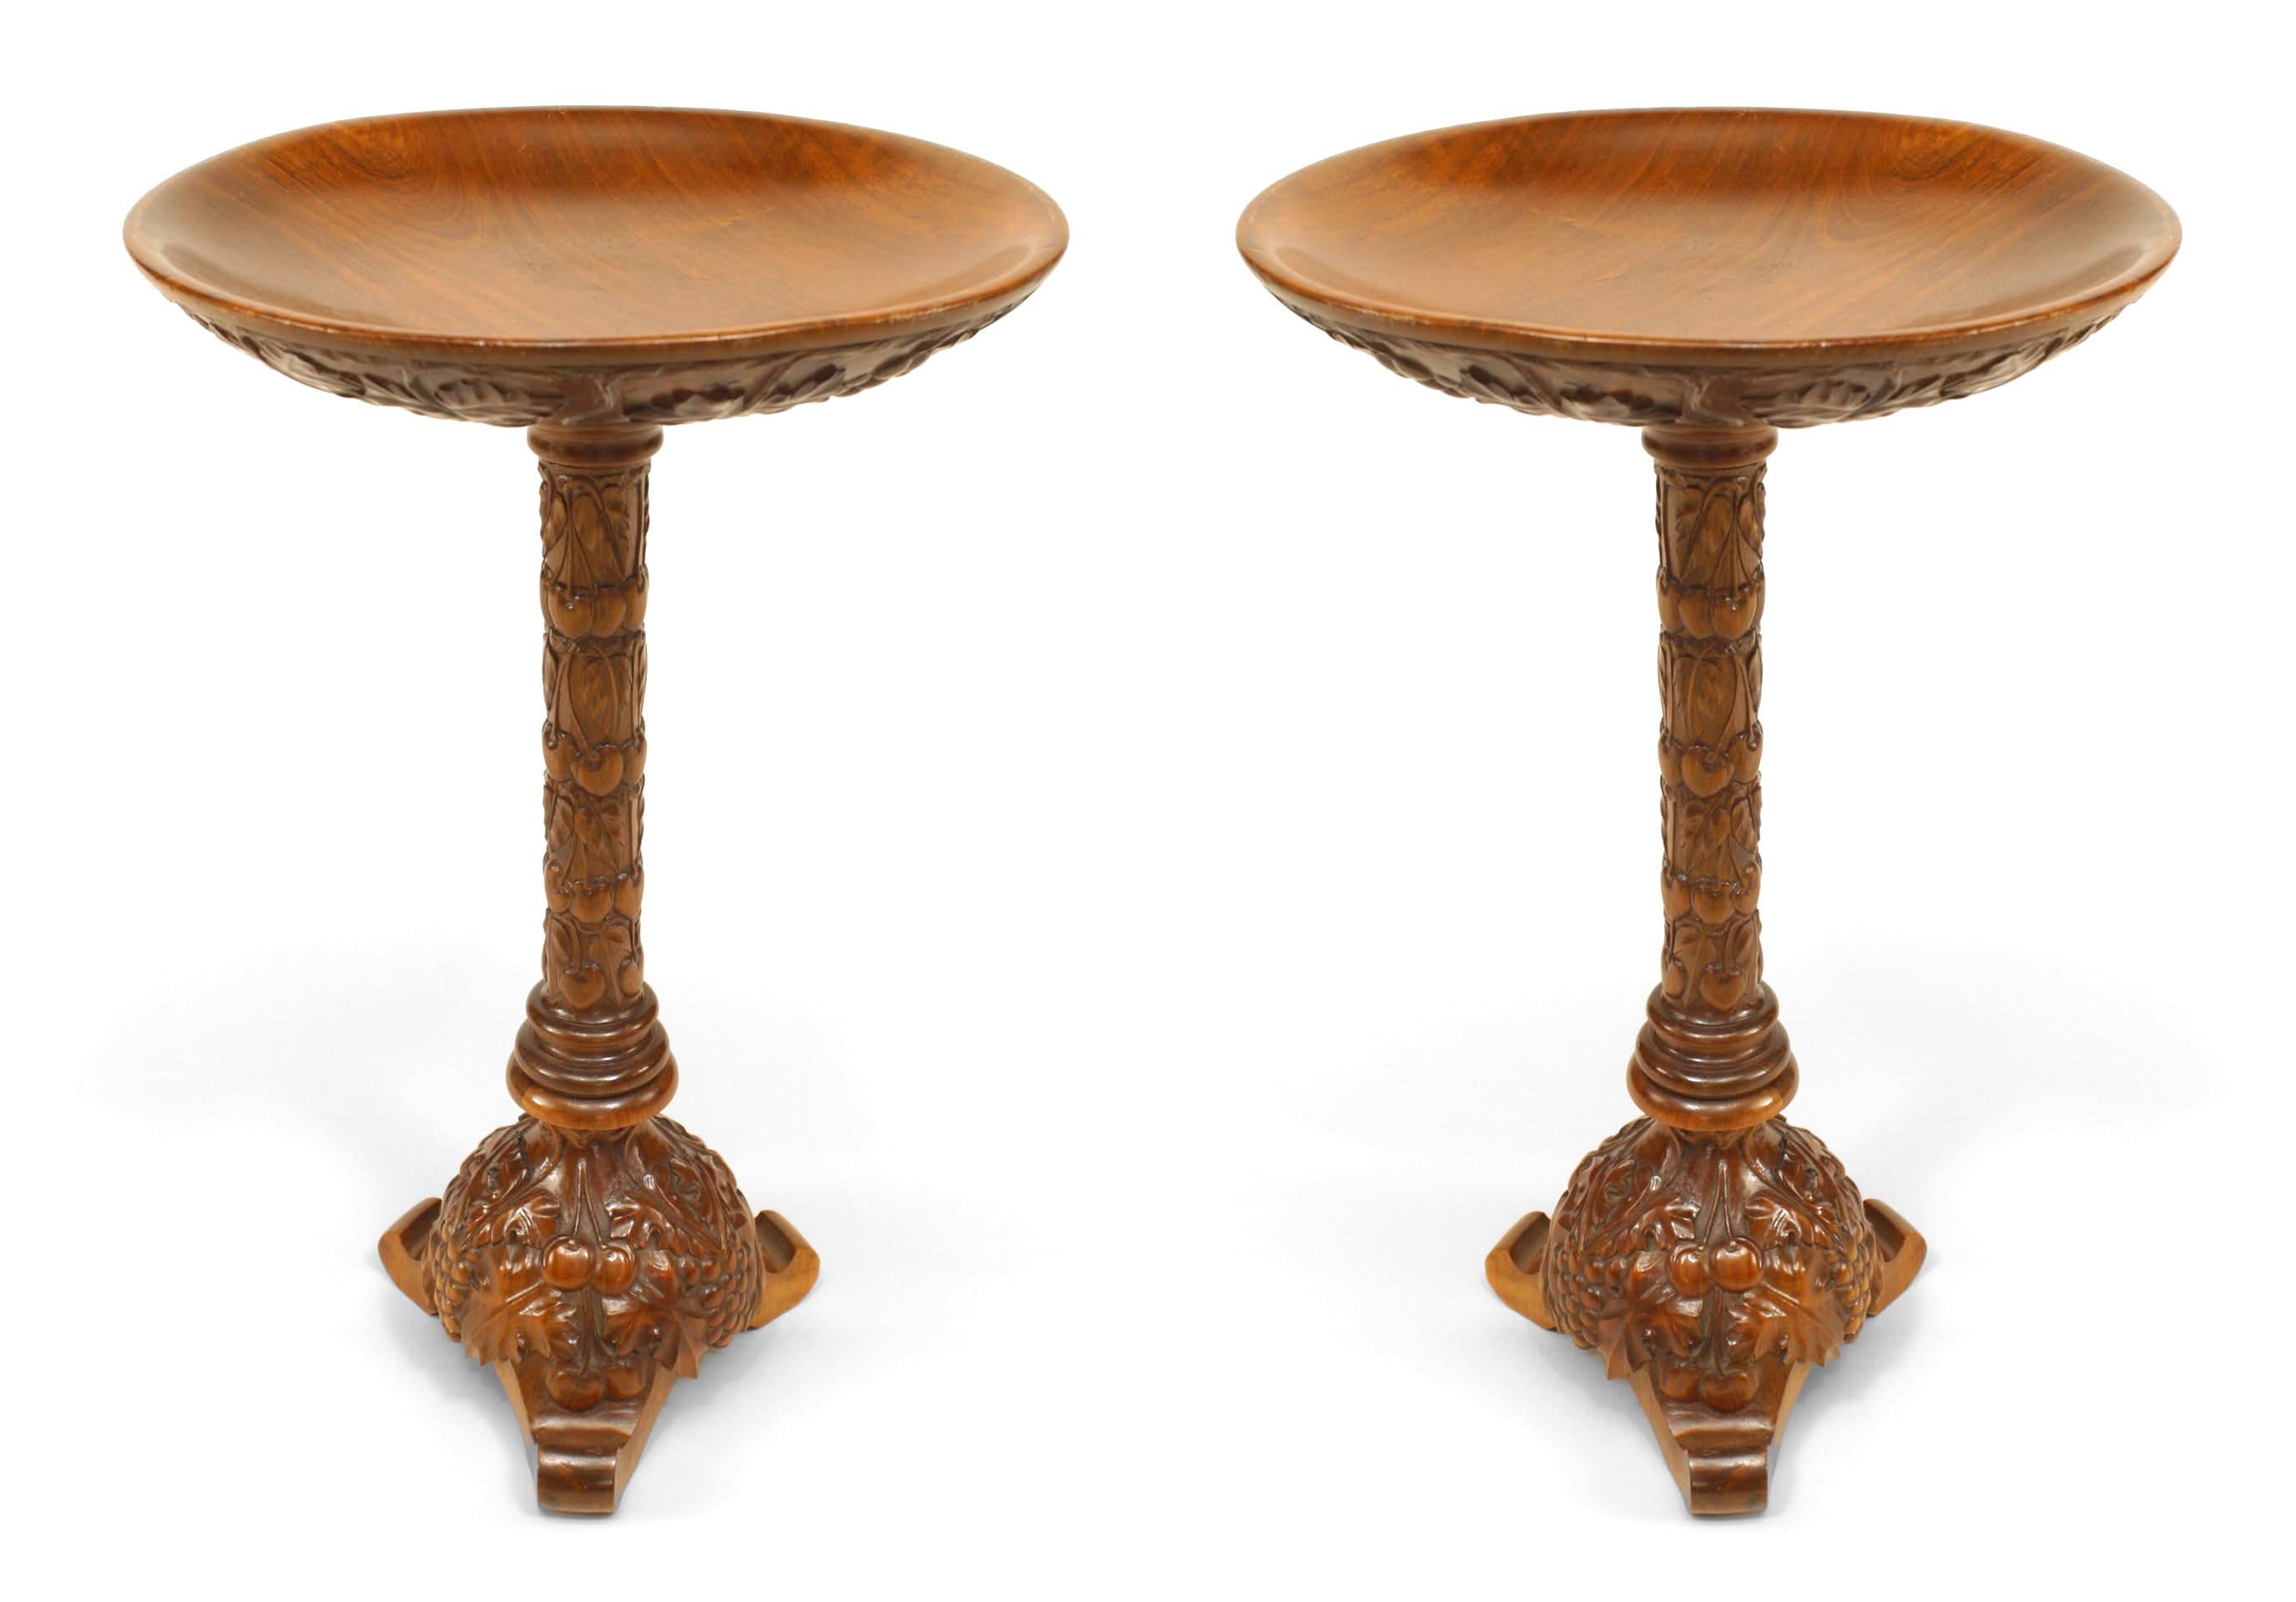 Pair of Italian neo-classic-style (19/20th Century) walnut low end tables (stands) carved with a floral and grape design and having a bowl form top. (PRICED AS Pair).
 